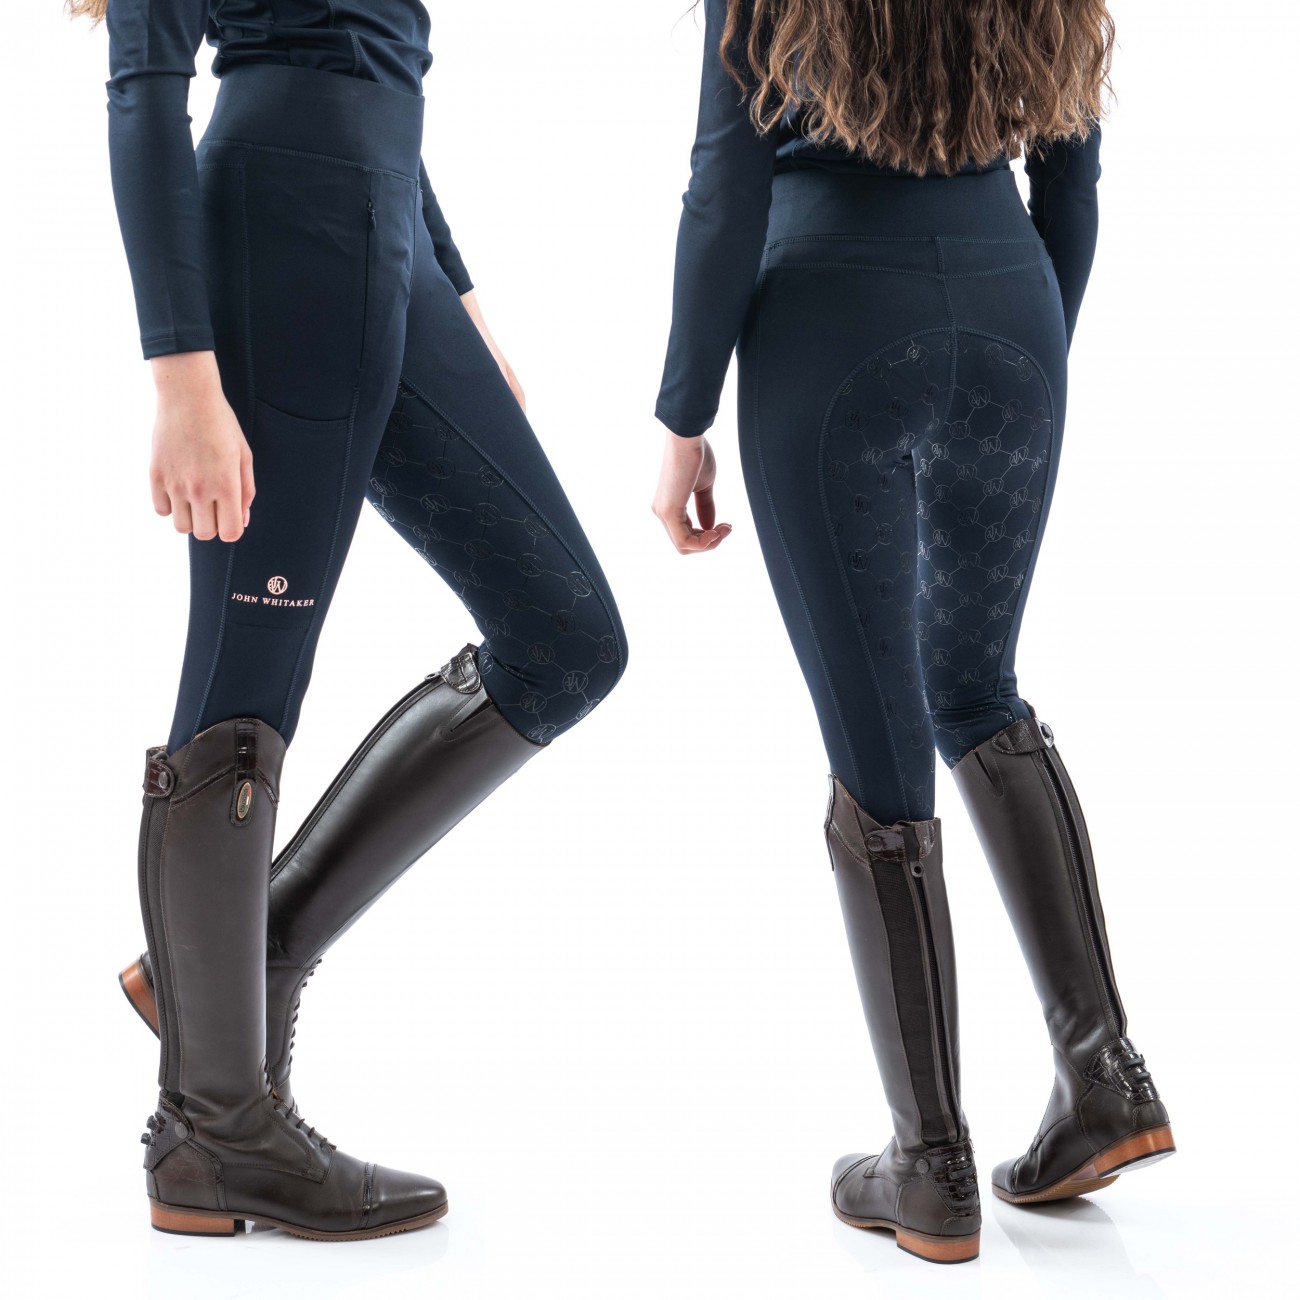 New WHITAKER Women’s Riding Tights 